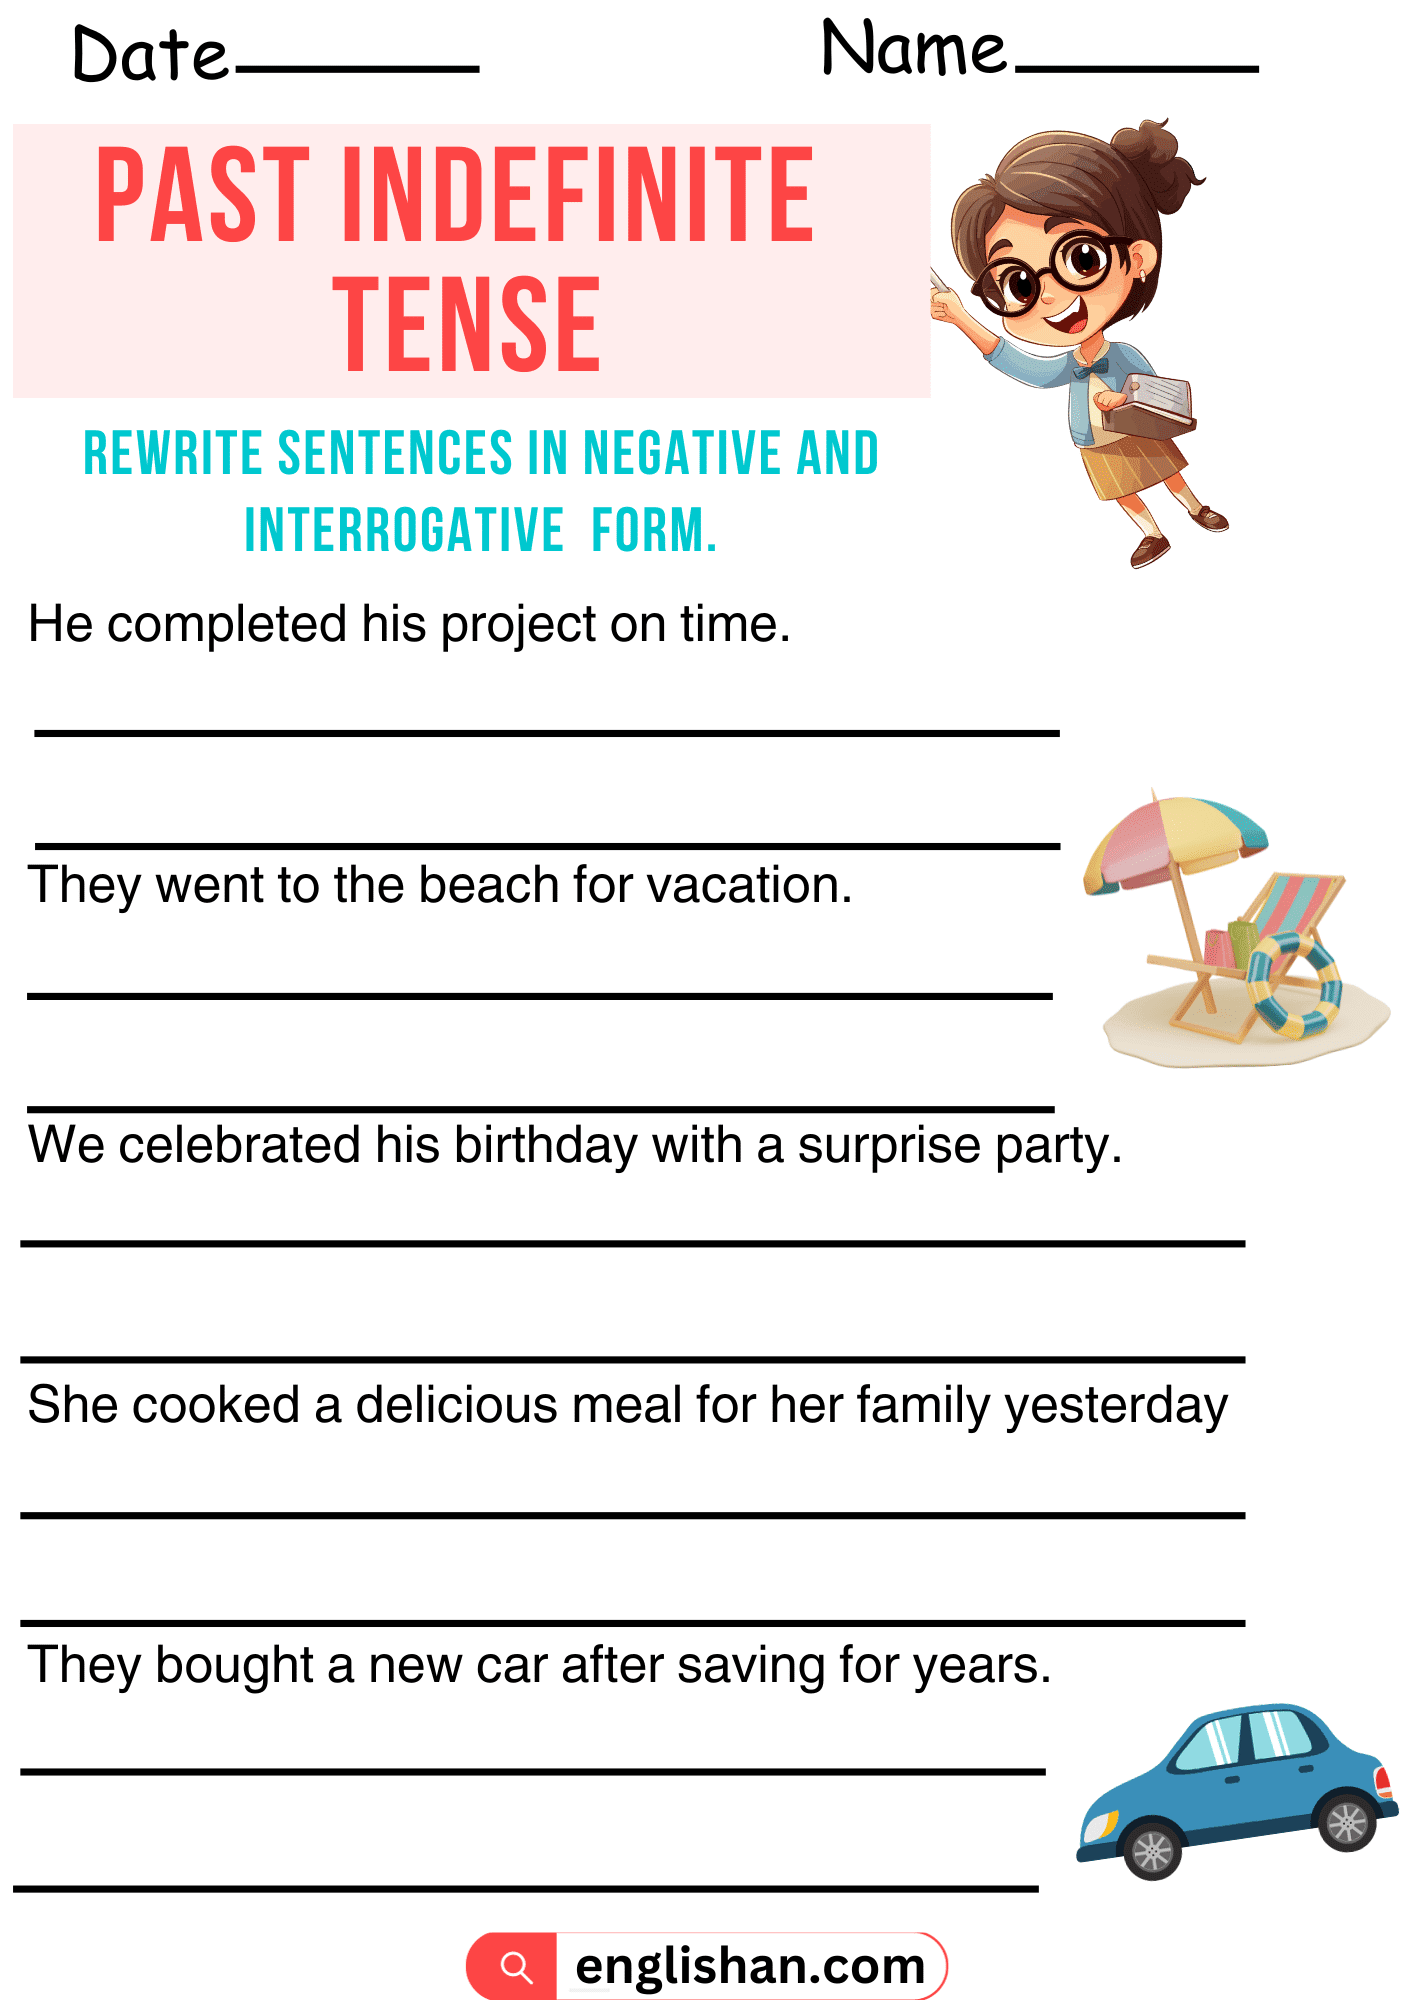 Negative and Interrogative form of Past Indefinite Tense. How to make Negative and Interrogative of Past Indefinite Tense.